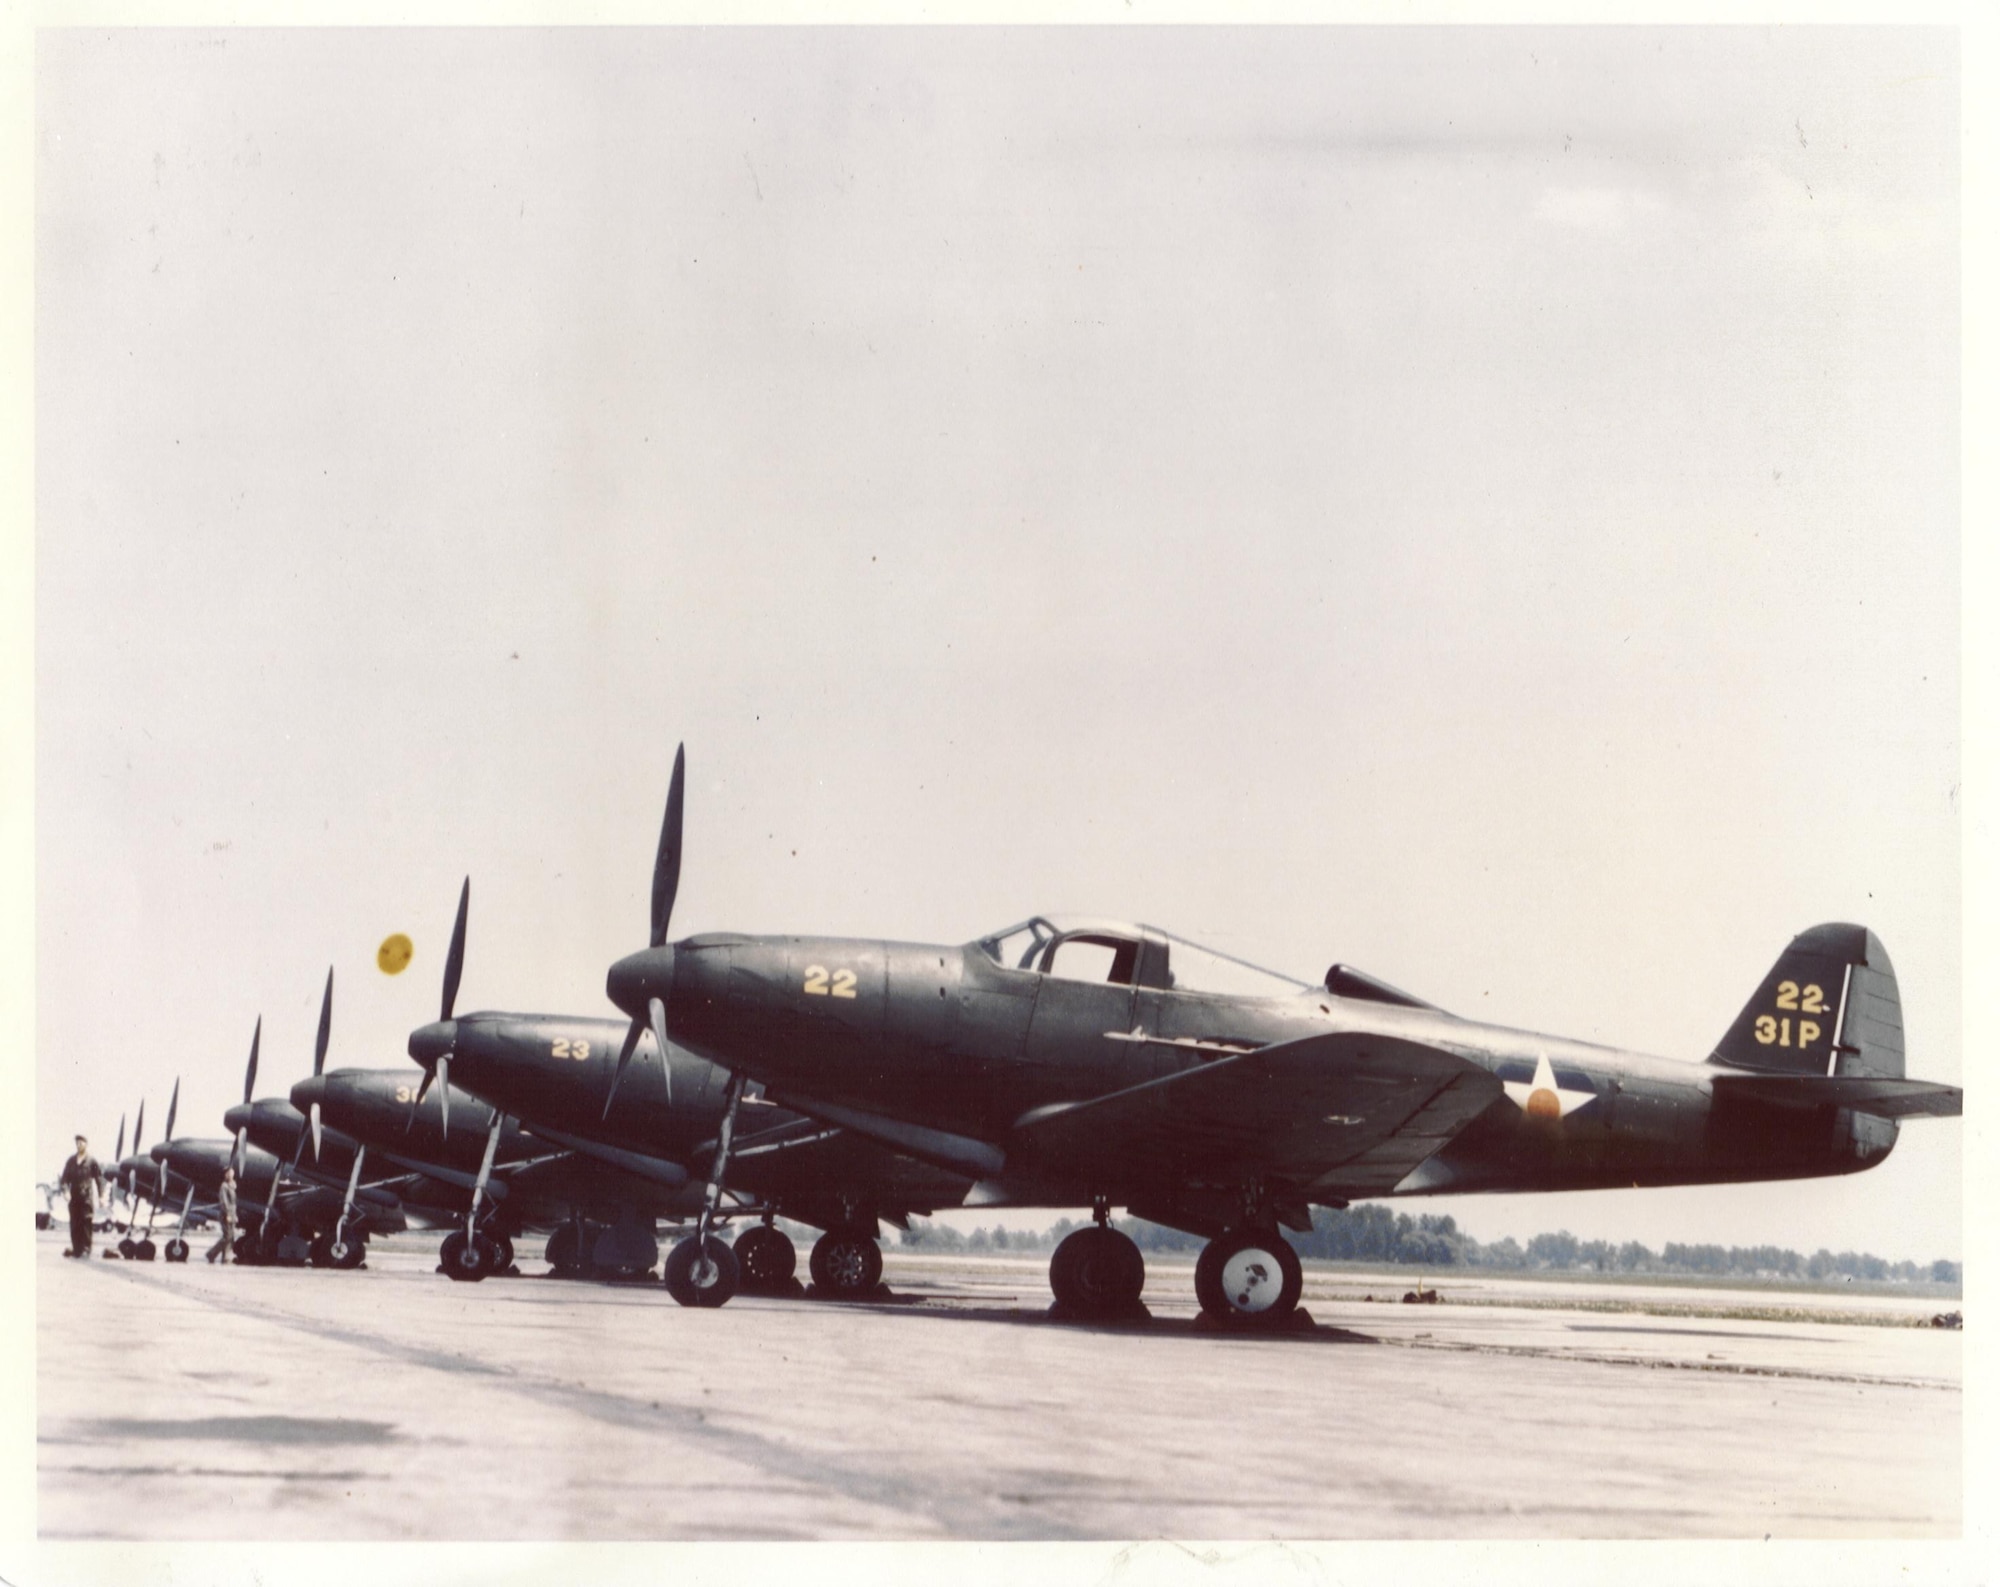 Poised on the flightline are P-39s  from the 33rd Fighter Group at Mitchel Field, N.Y., circa 1941. The 33rd FG belonged to First Air Force from Jan. 16, 1941 to March 21, 1942..